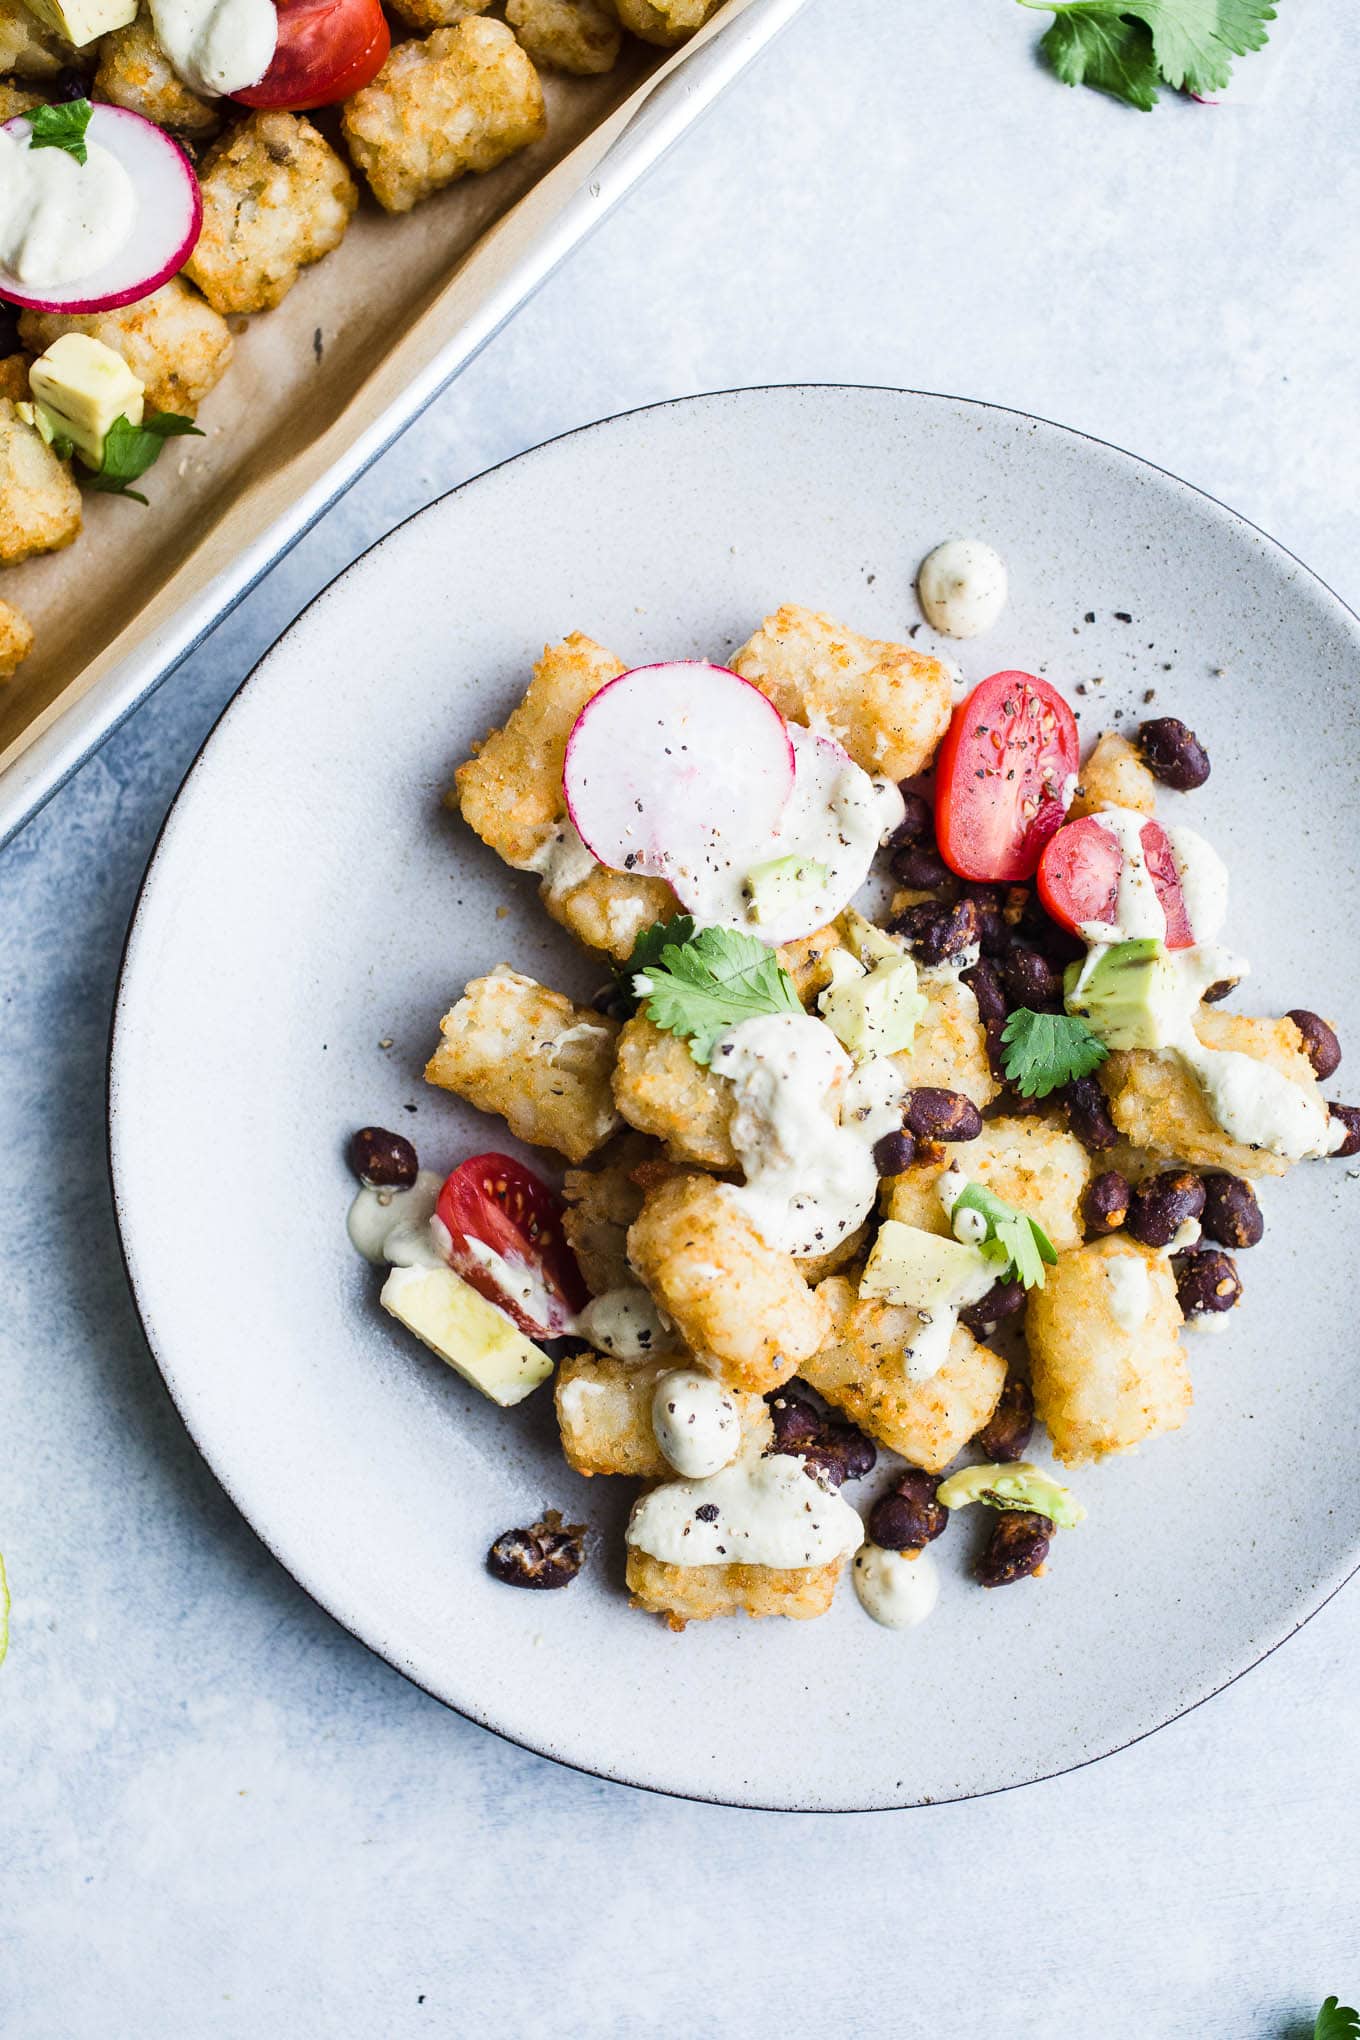 Vegan Salsa Verde Totchos made with a green salsa cashew cheese sauce and loaded with vegetarian toppings. A gluten-free tater tot nachos recipe!